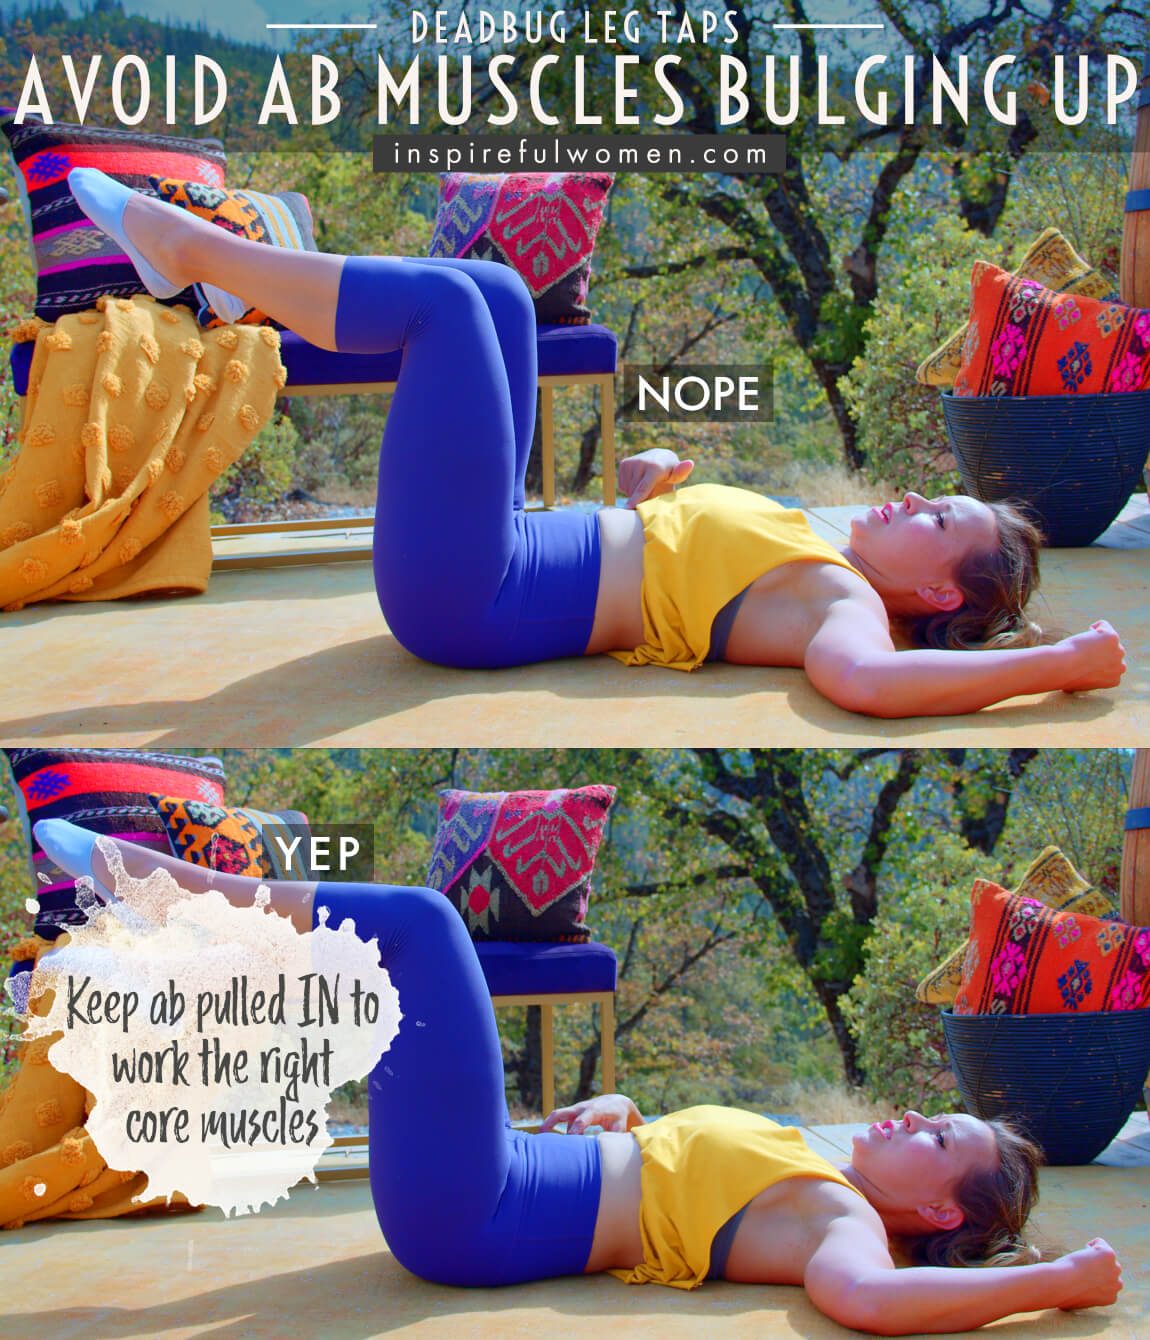 avoid-ab-muscles-bulging-up-dead-bug-taps-ab-exercise-proper-form